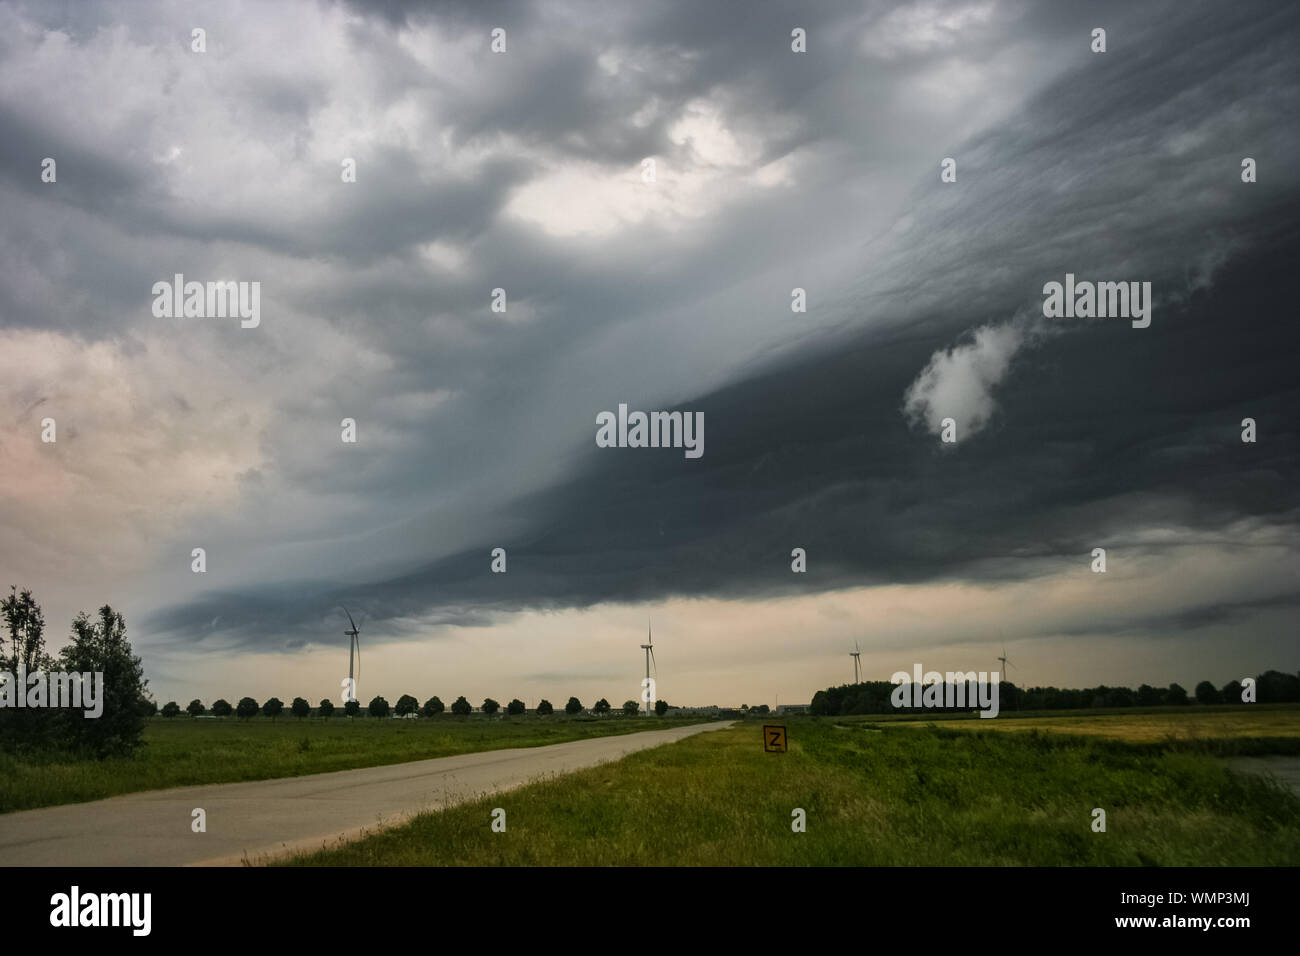 Shelfcloud of a storm front moves across the countryside in The Netherlands Stock Photo